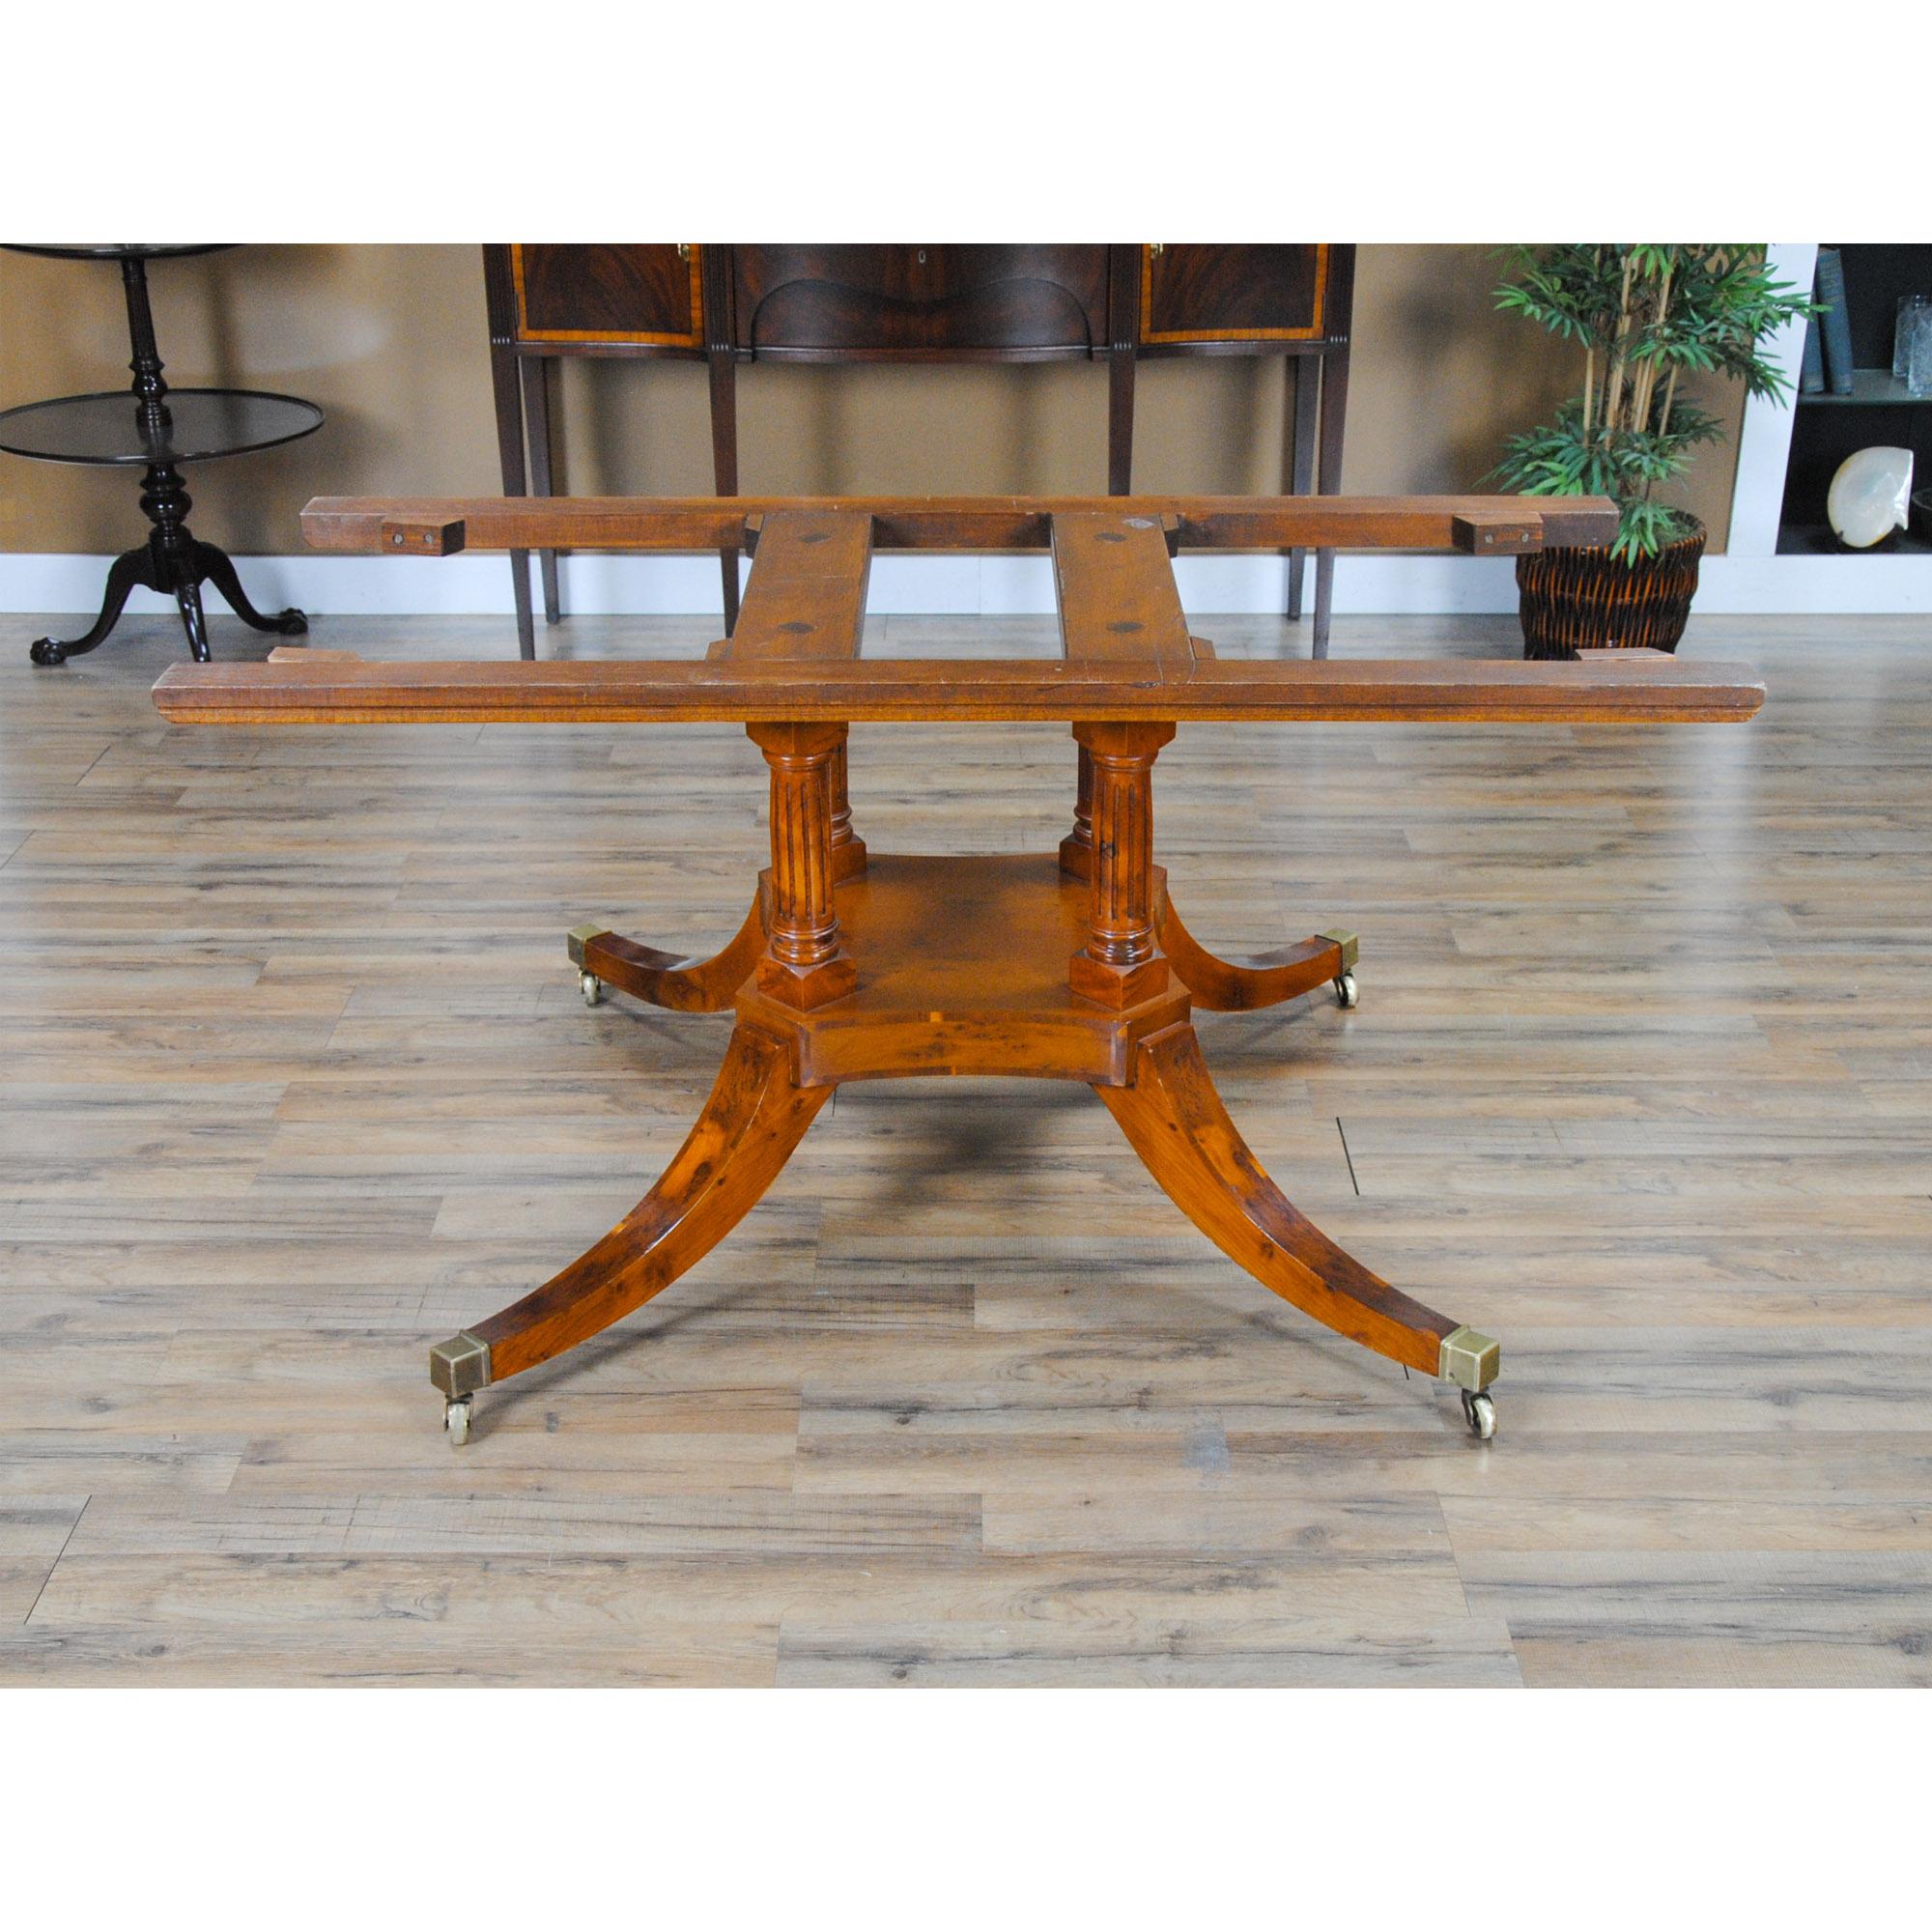 A large size Vintage English round to oval dining table with one extension board in excellent condition. The top has recently been French polished to give it that fresh from the showroom appeal.

Elegant in its’ simple styling this beautiful